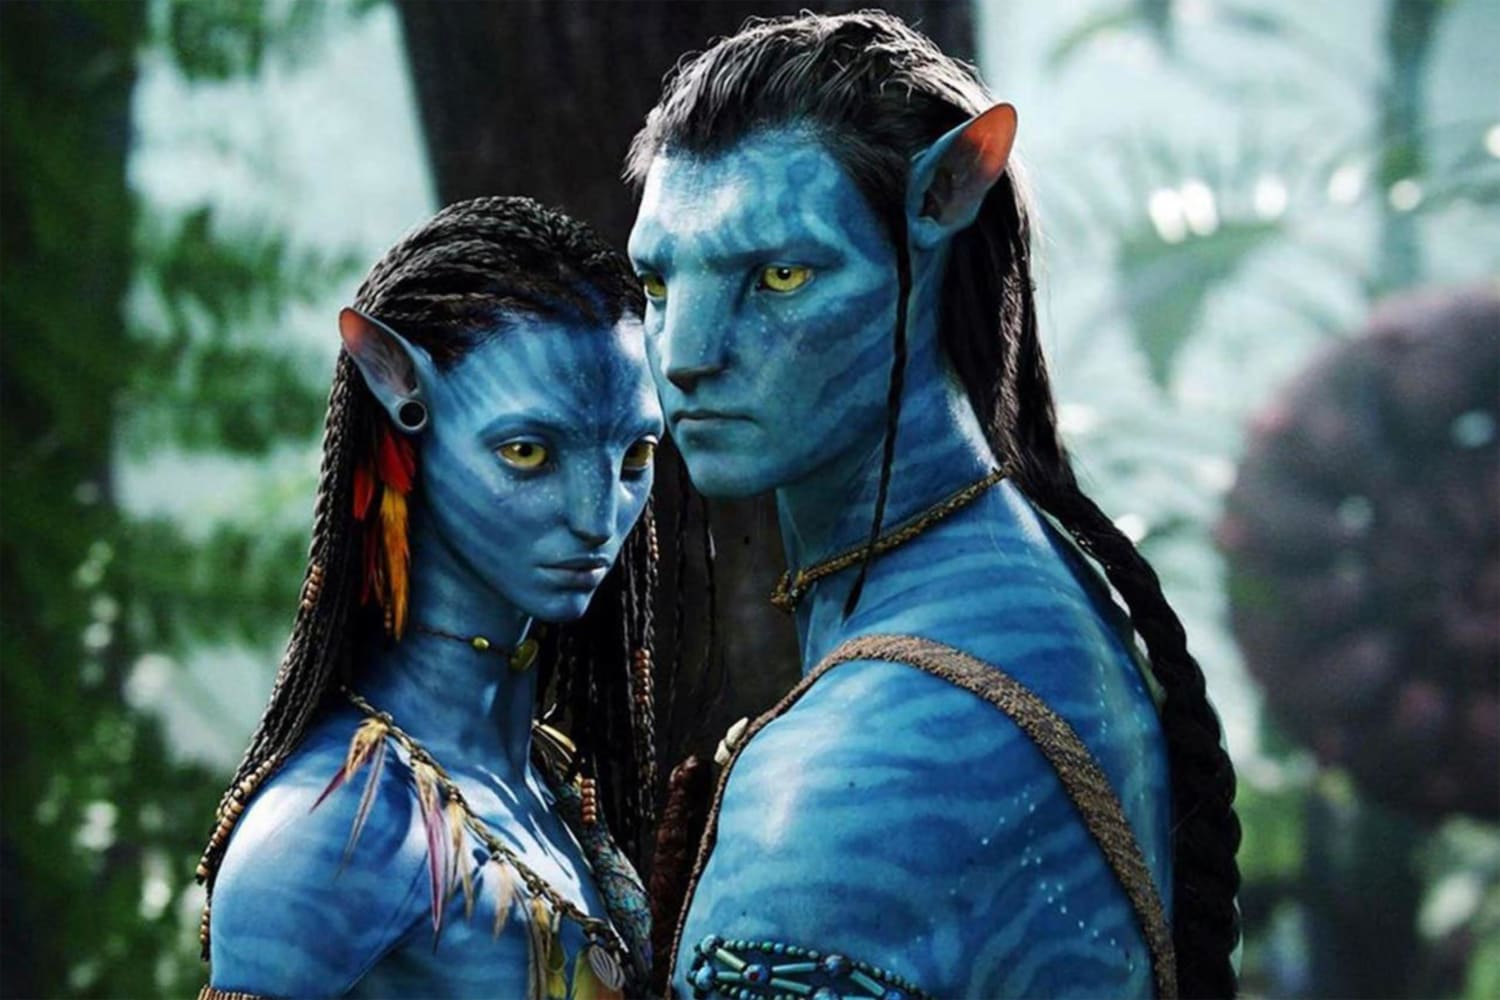 What To Remember From Avatar Movie Recap Before Sequel